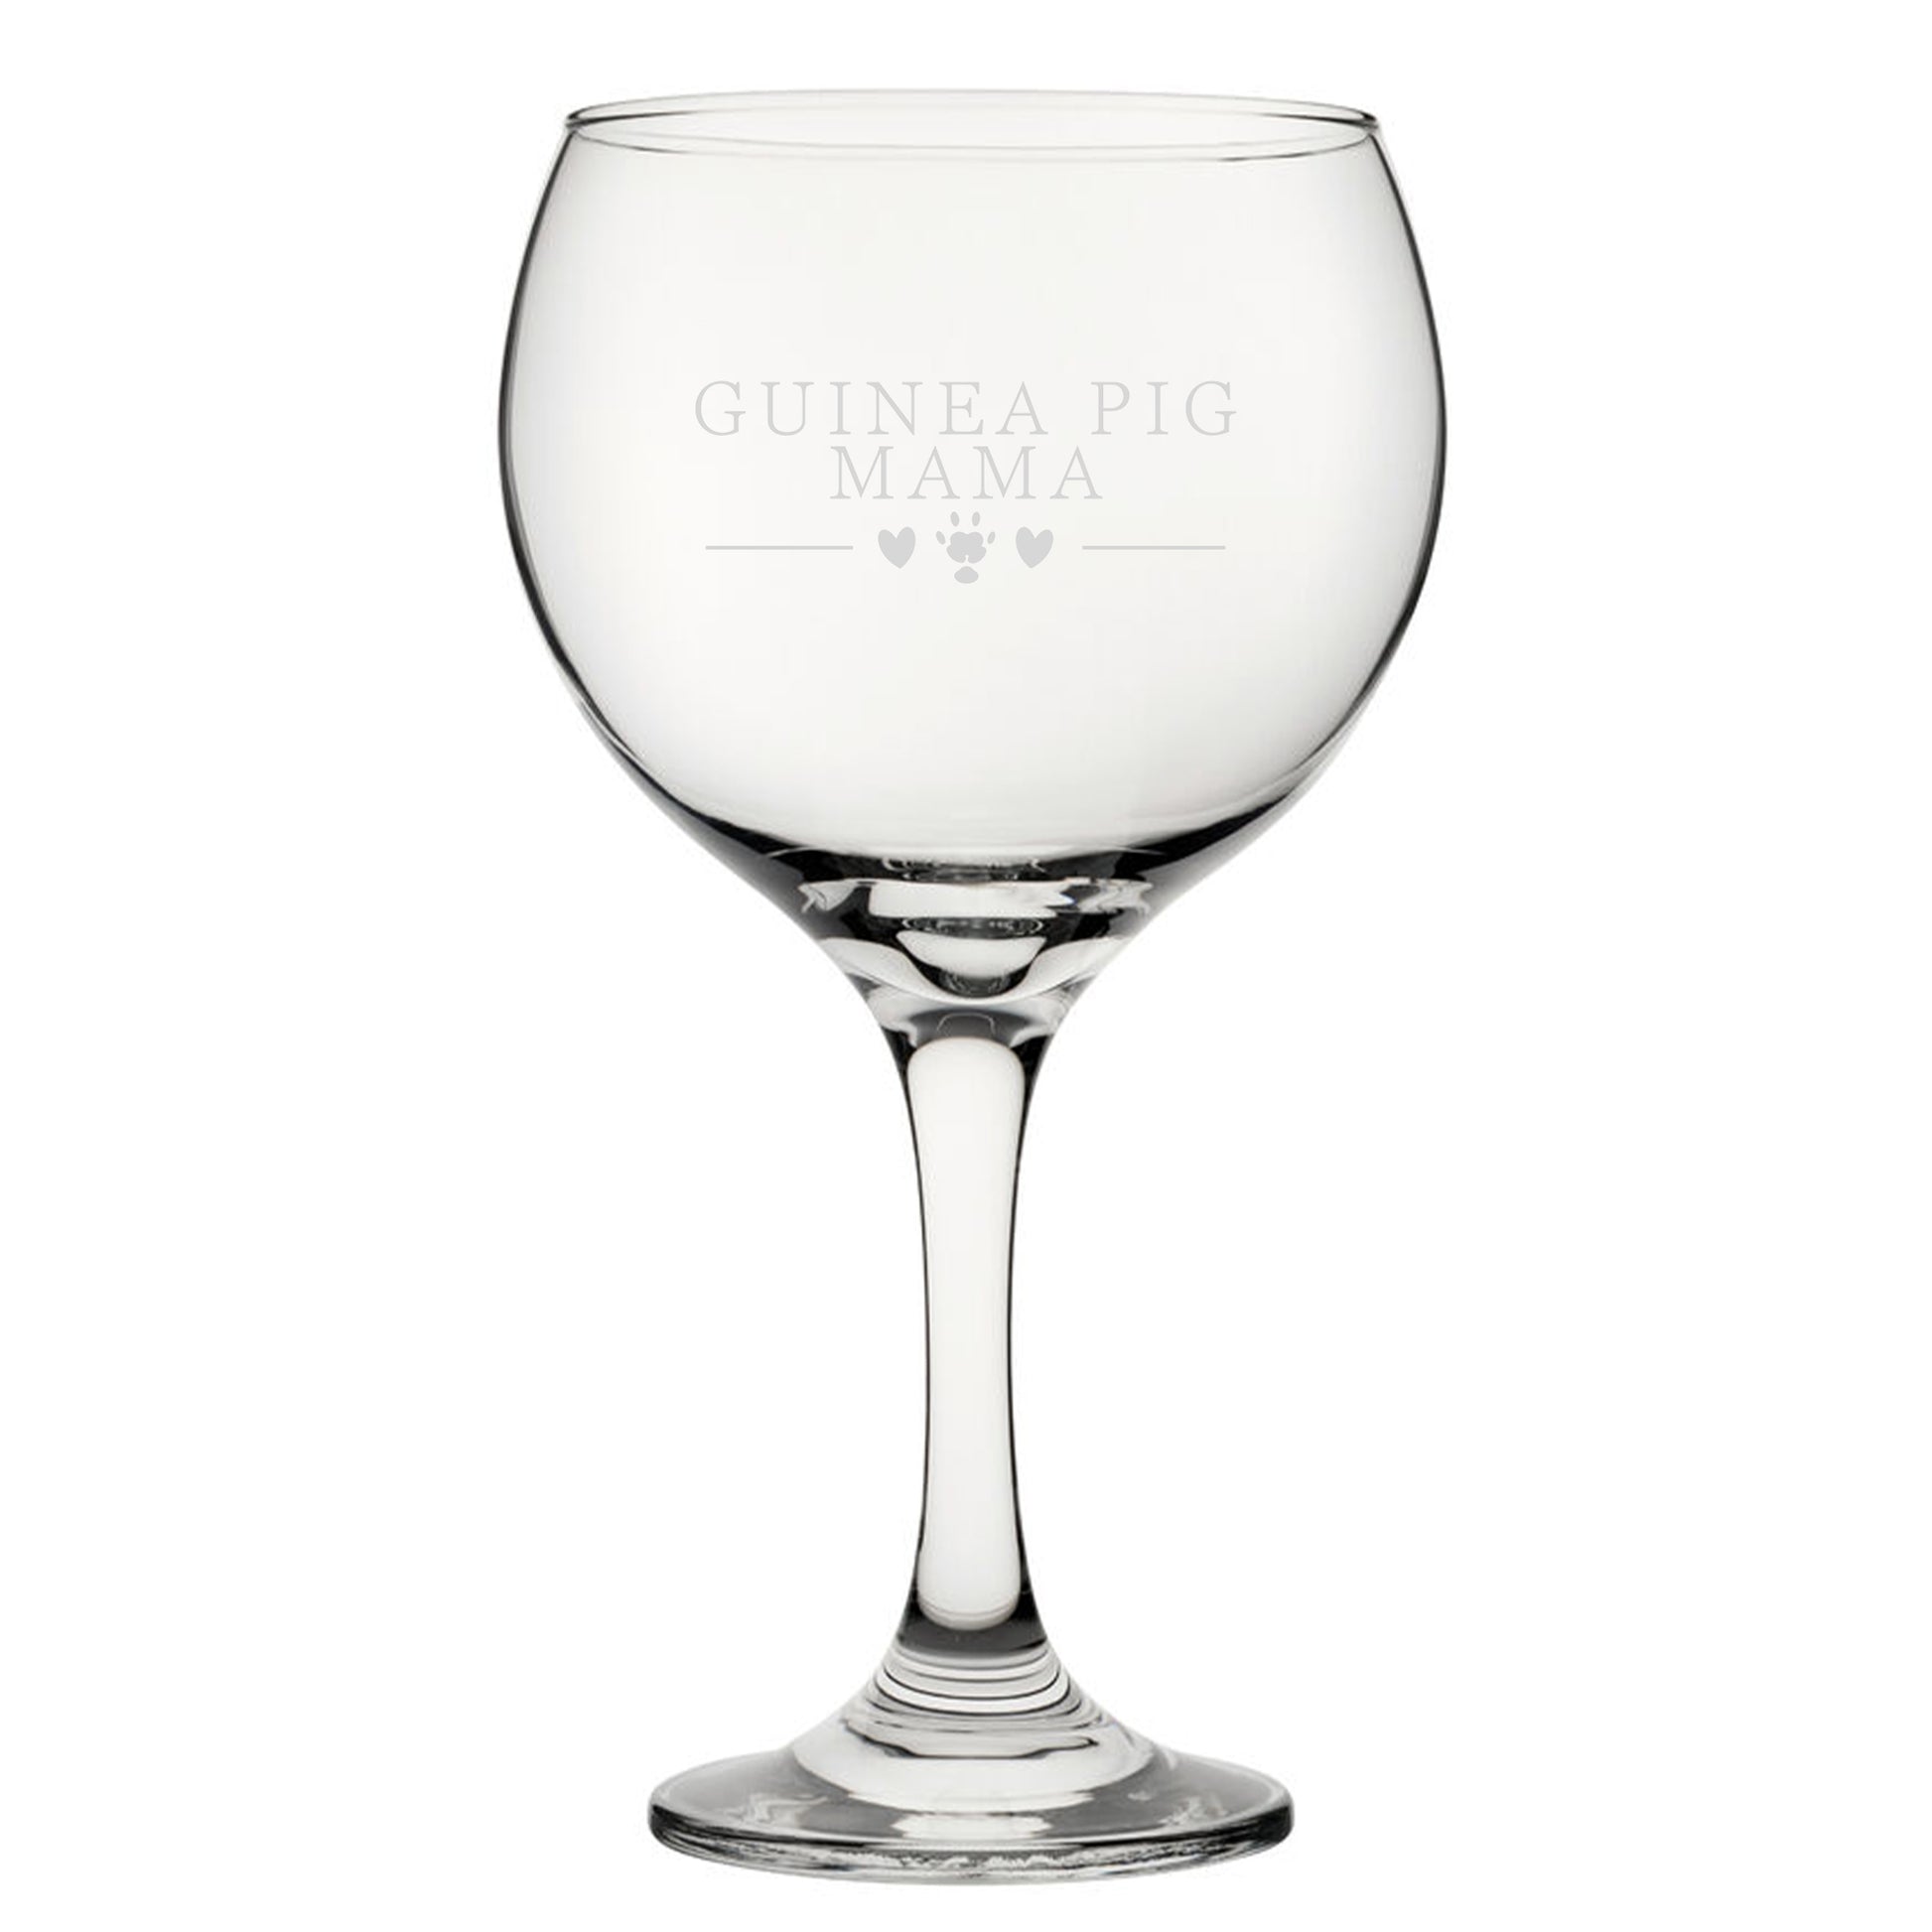 Guinea Pig Papa - Engraved Novelty Gin Balloon Cocktail Glass Image 2